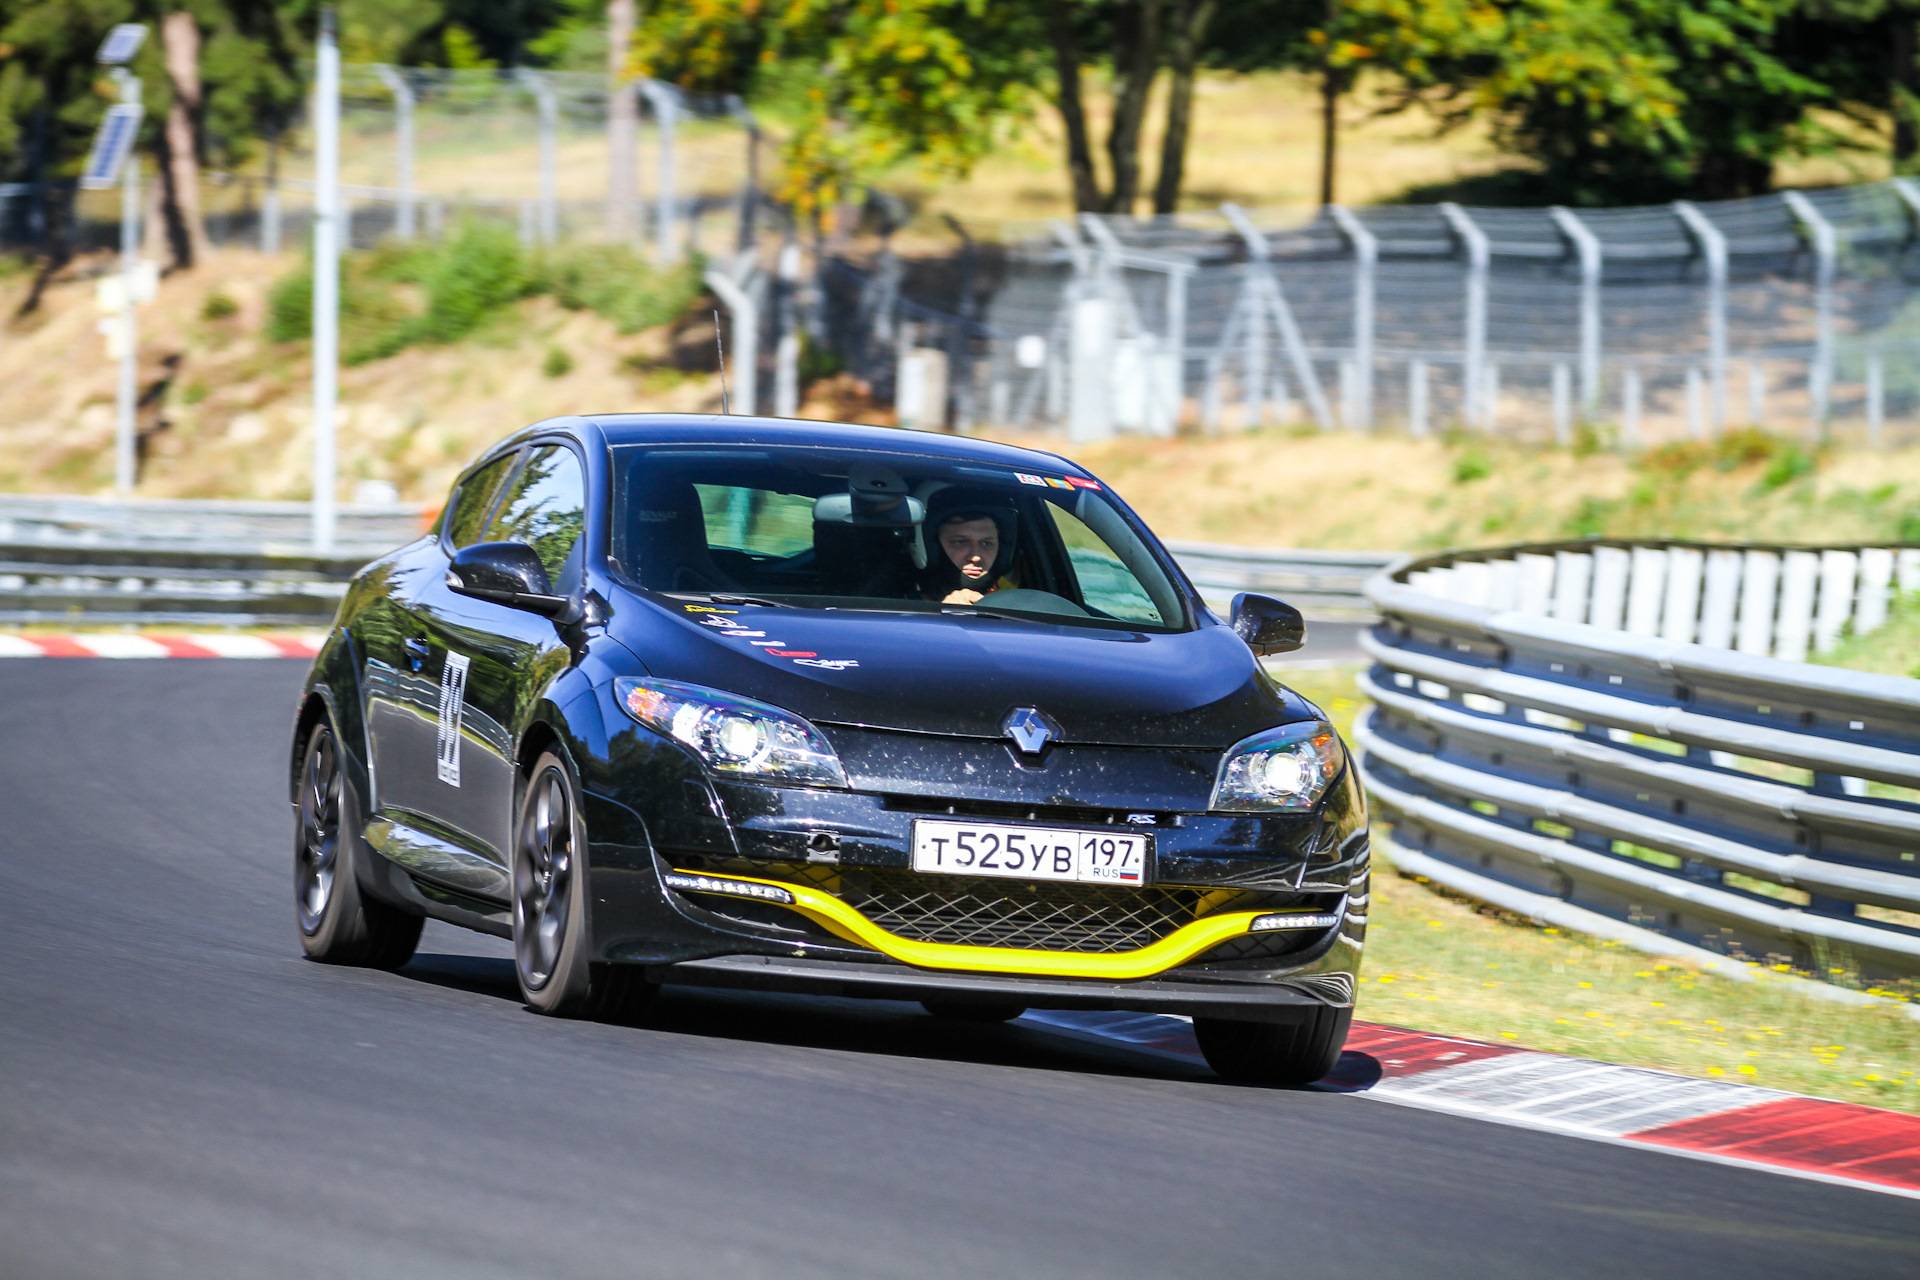 Fastest hot hatchbacks - the top 10 by nurburgring lap time